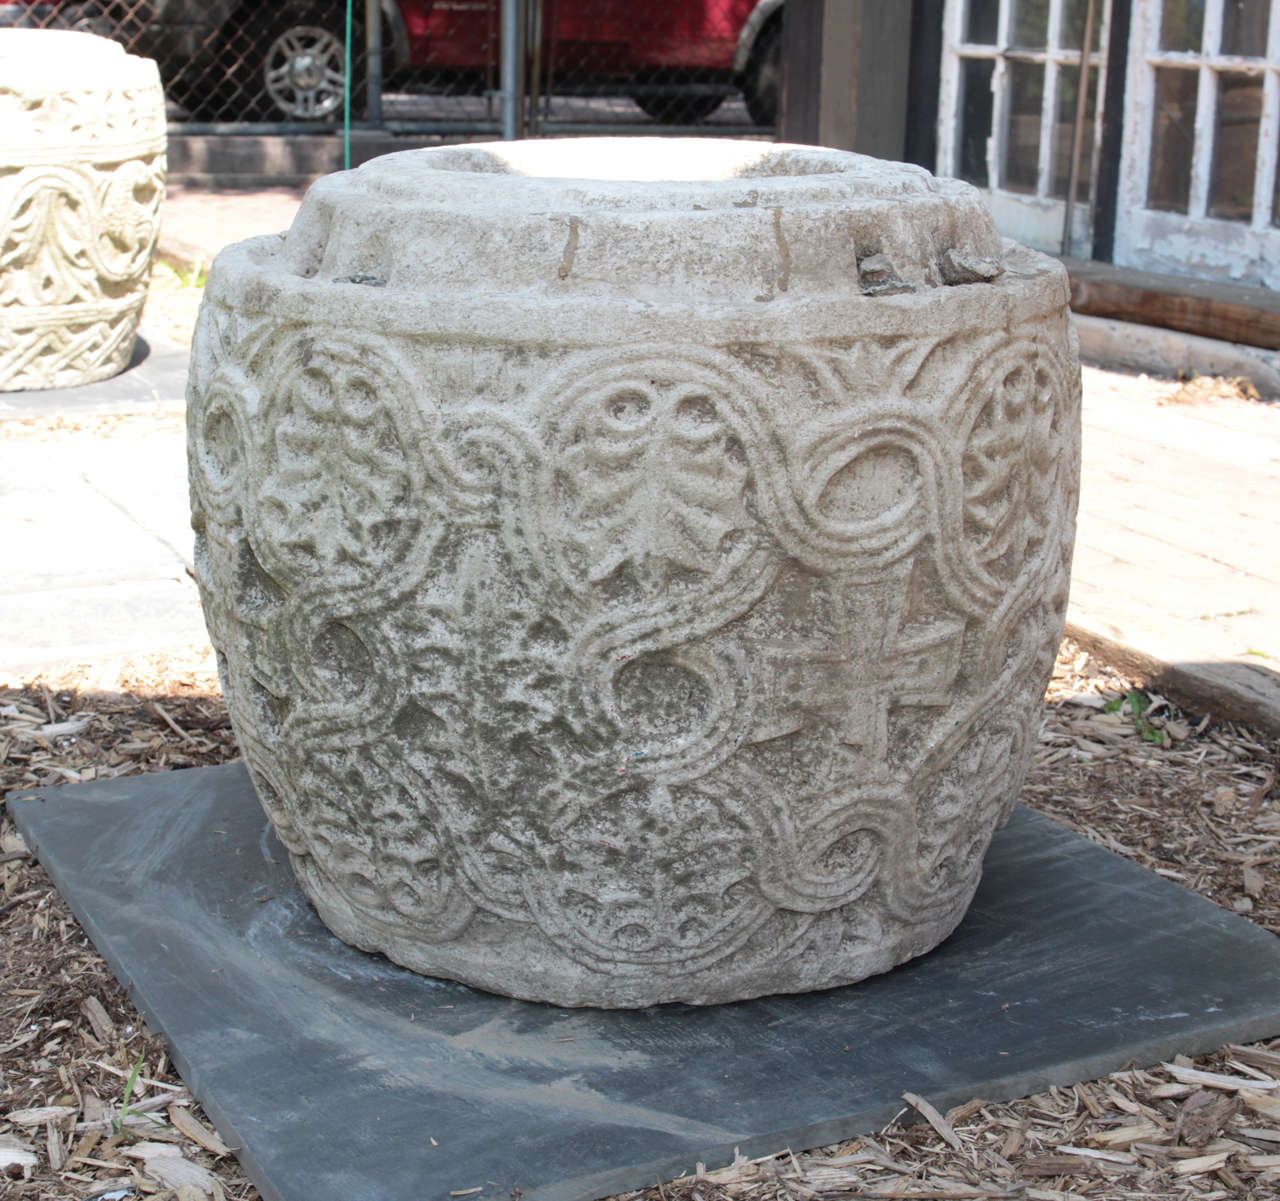 18th century or earlier. Important and rare hand-carved limestone vessel depicting leaves and ancient cross symbols. Most likely originally used to collect water. Fabulous as a planter or garden ornament.